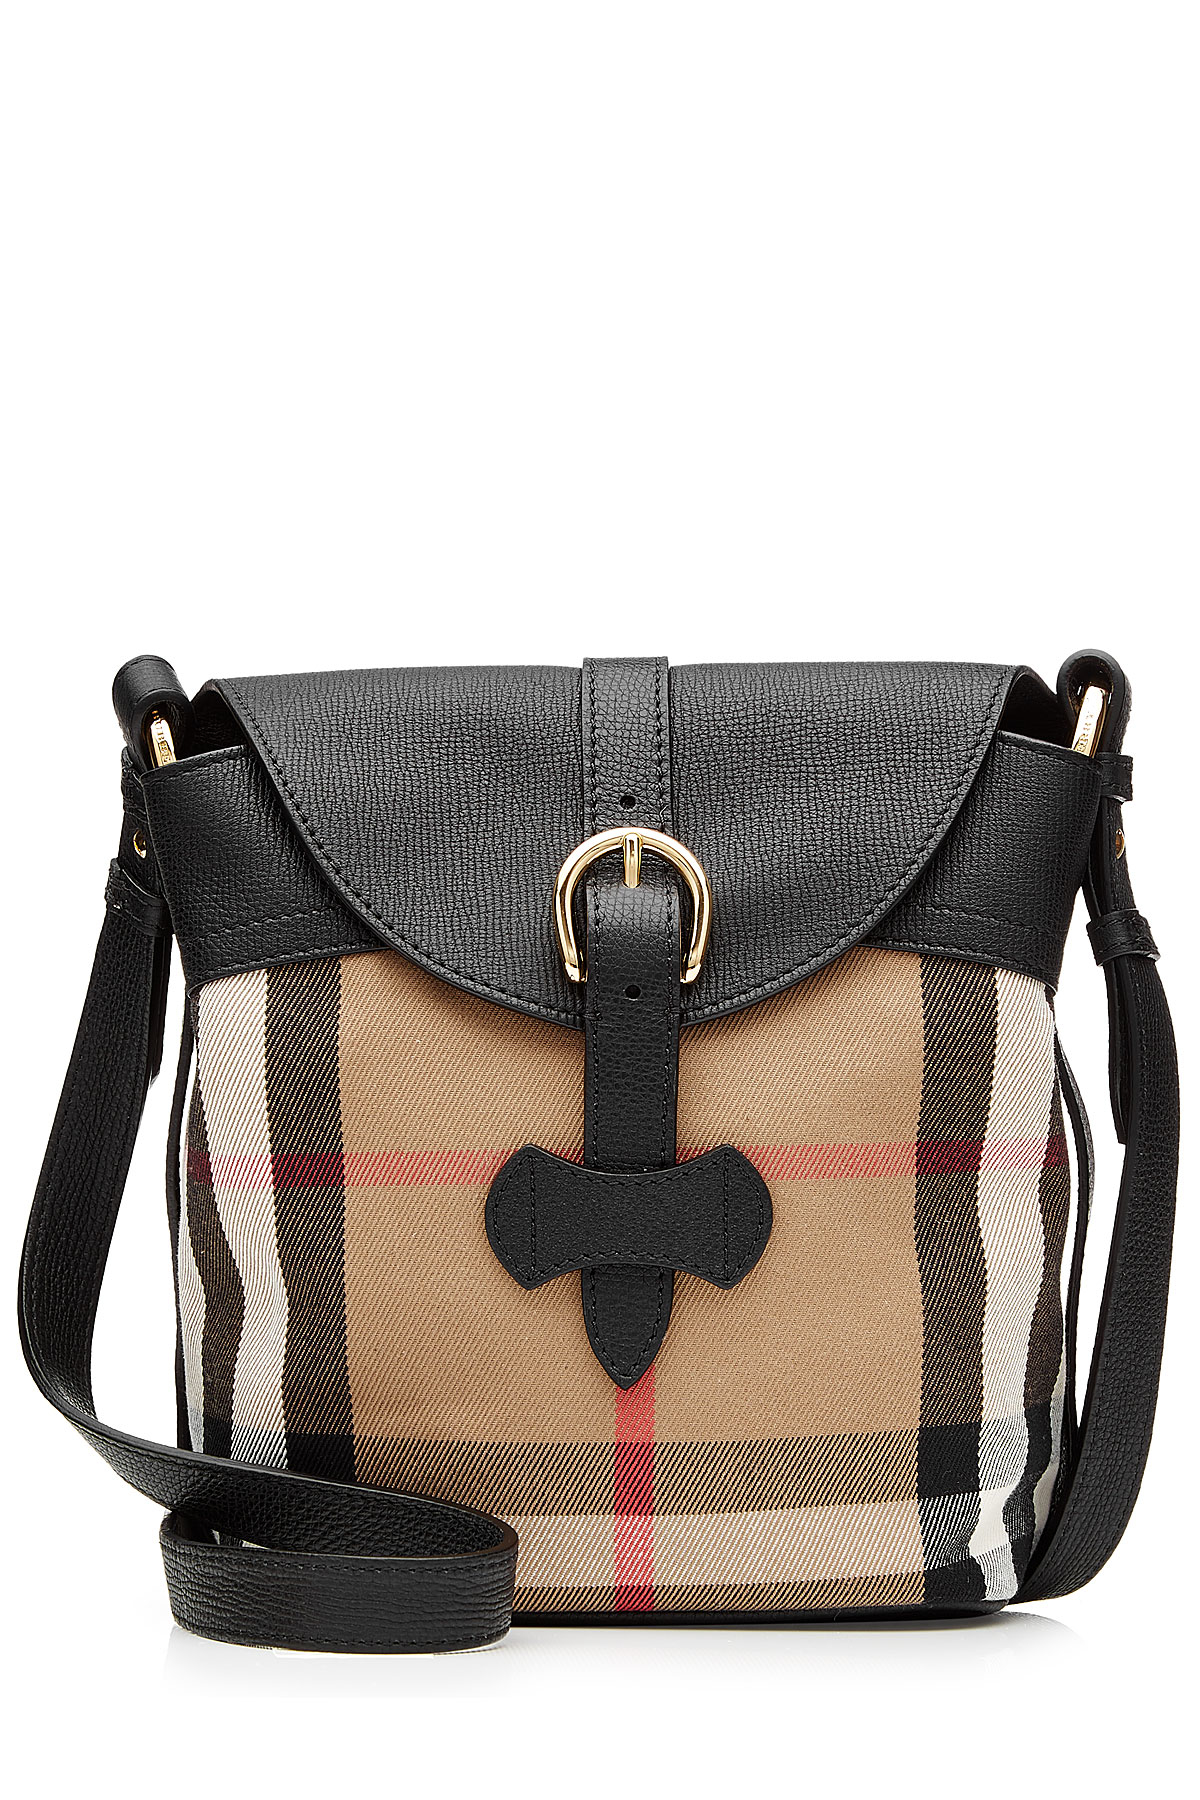 Lyst - Burberry Leather And Printed Fabric Bucket Bag - Multicolor in Brown